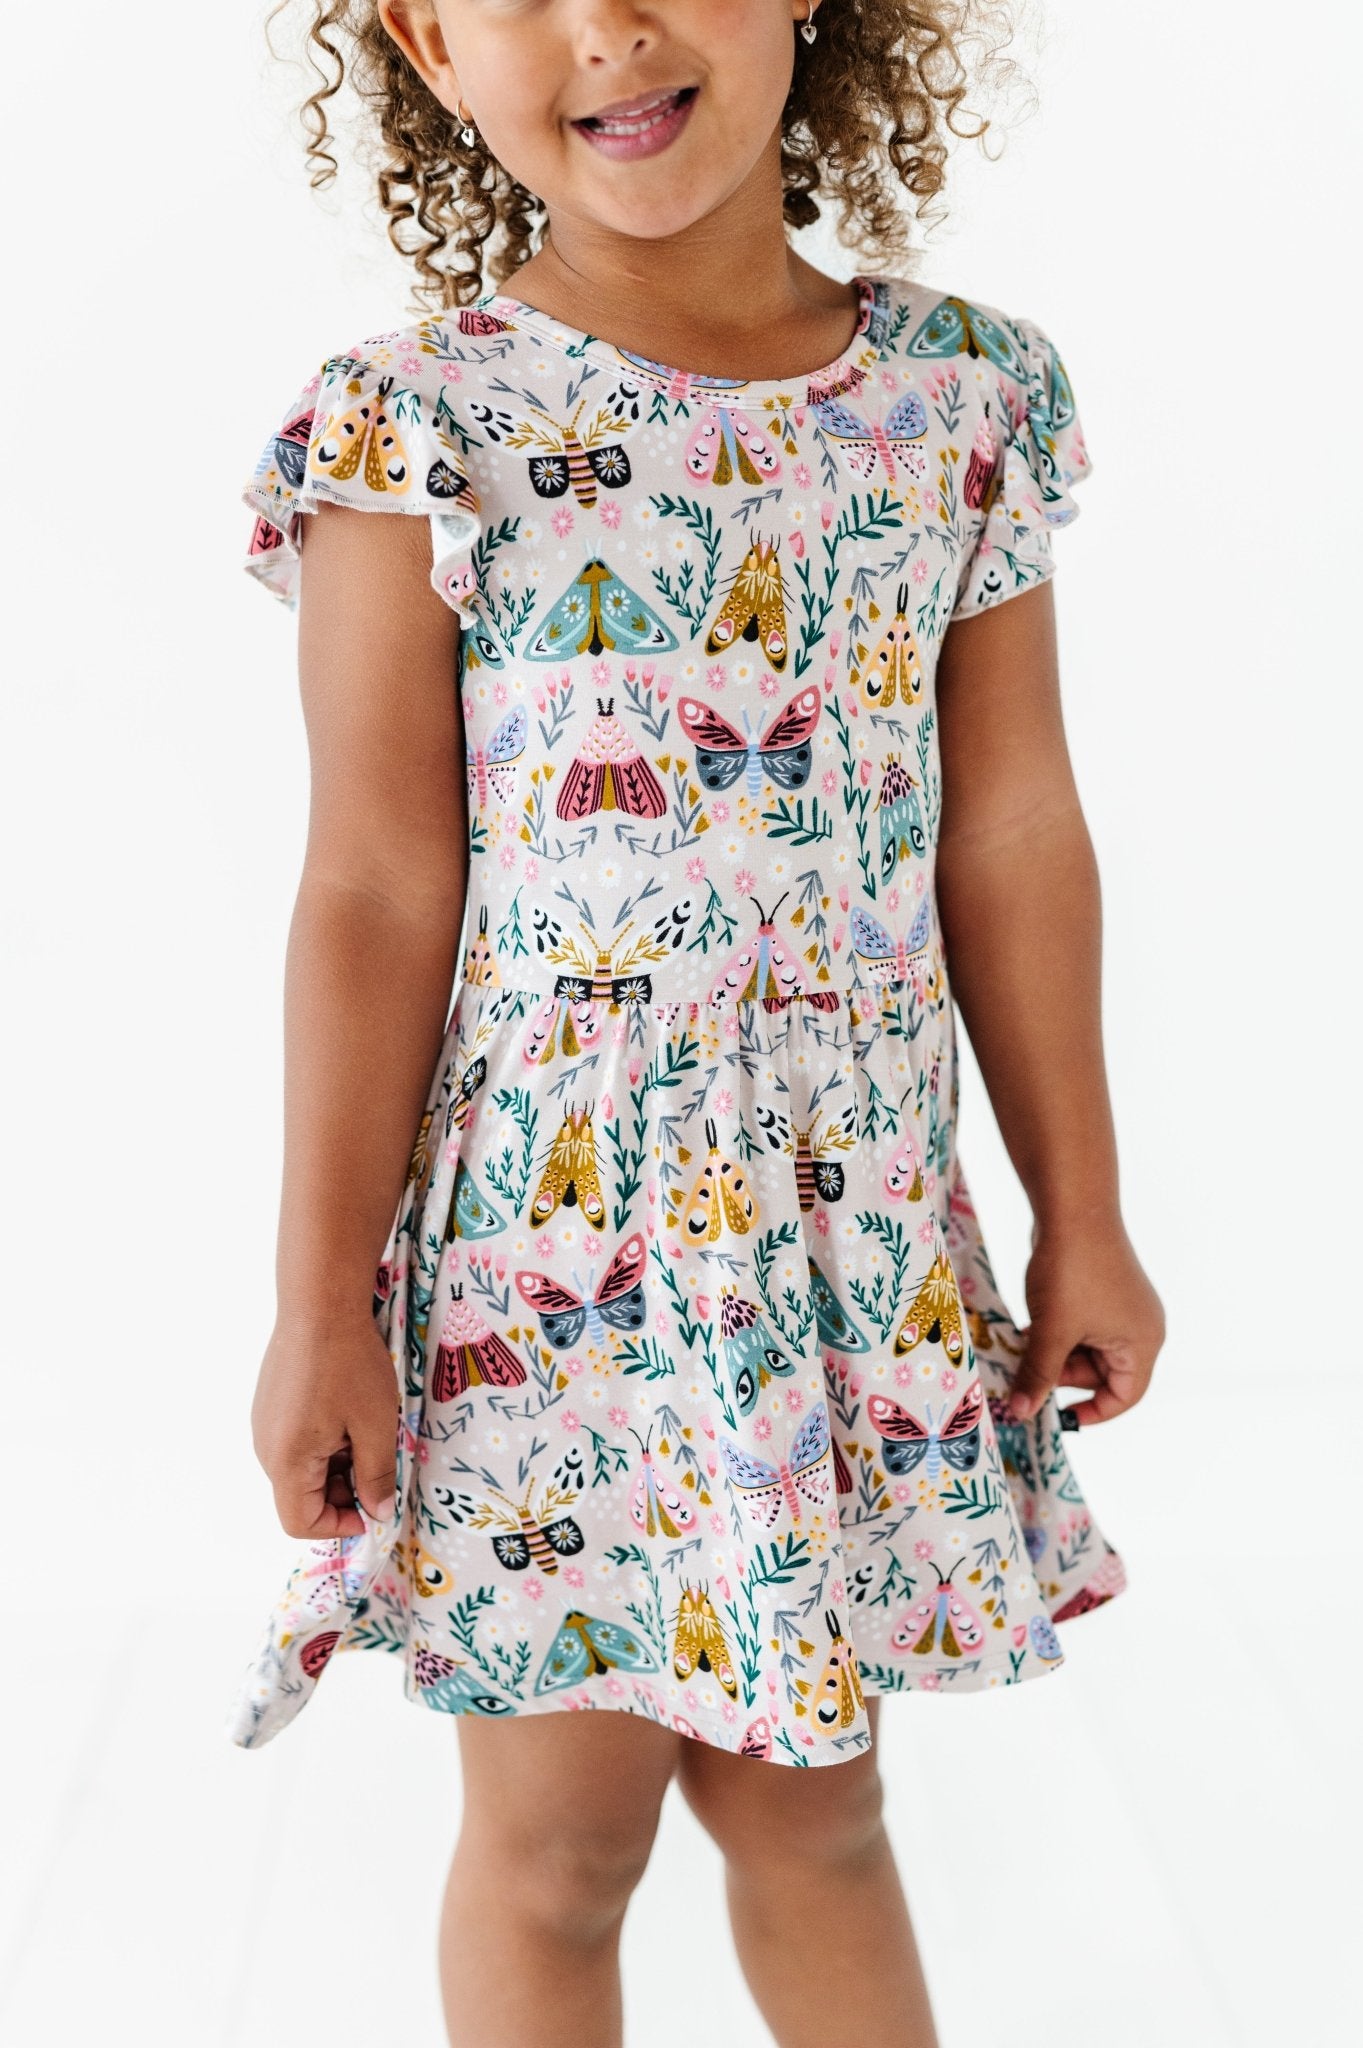 TWIRLIE DRESS WITH SHORTS - OH MOTH-ER - The Sleepy Sloth